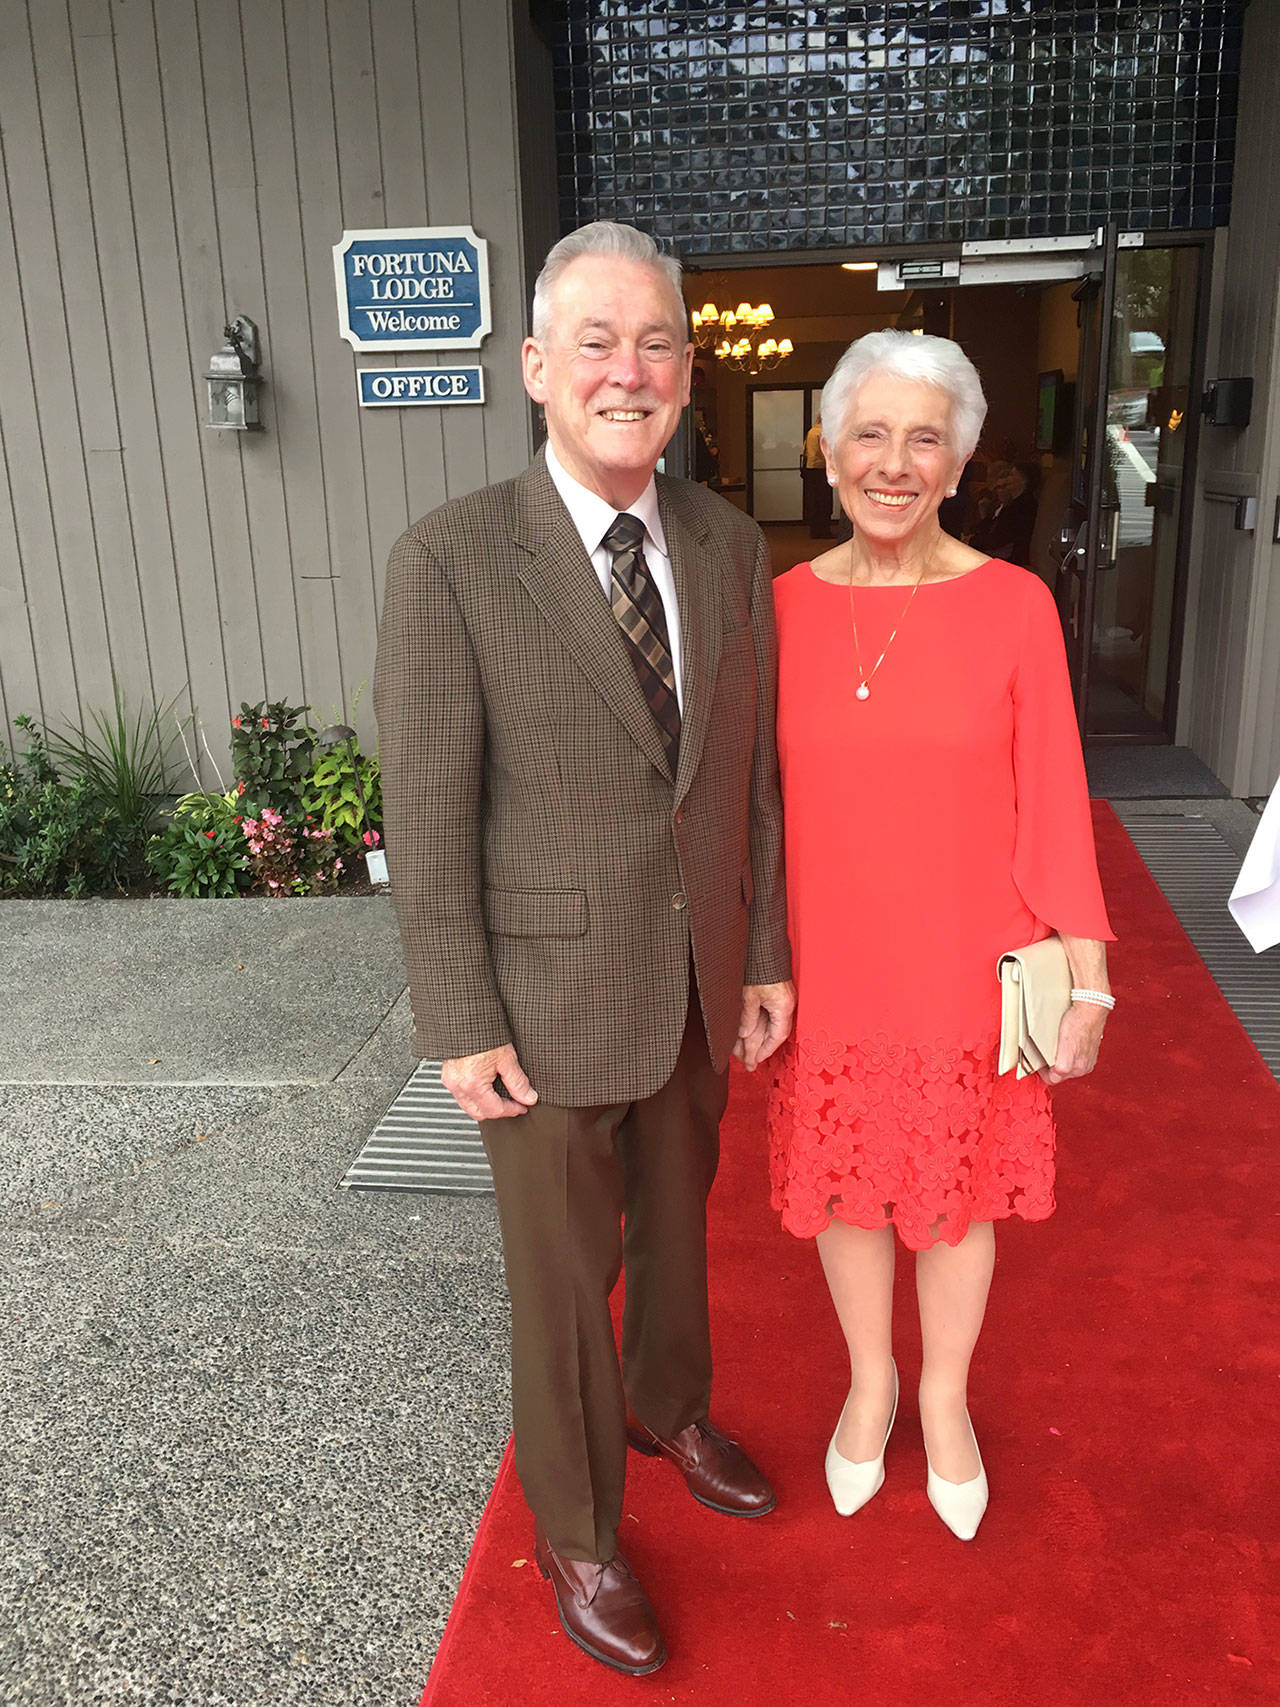 Russell and Fay Cheetham smile in front of the historic Fortuna Lodge at the celebration of Covenant Shores’ 40th anniversary on Mercer Island. Photo courtesy of Greg Asimakoupoulos